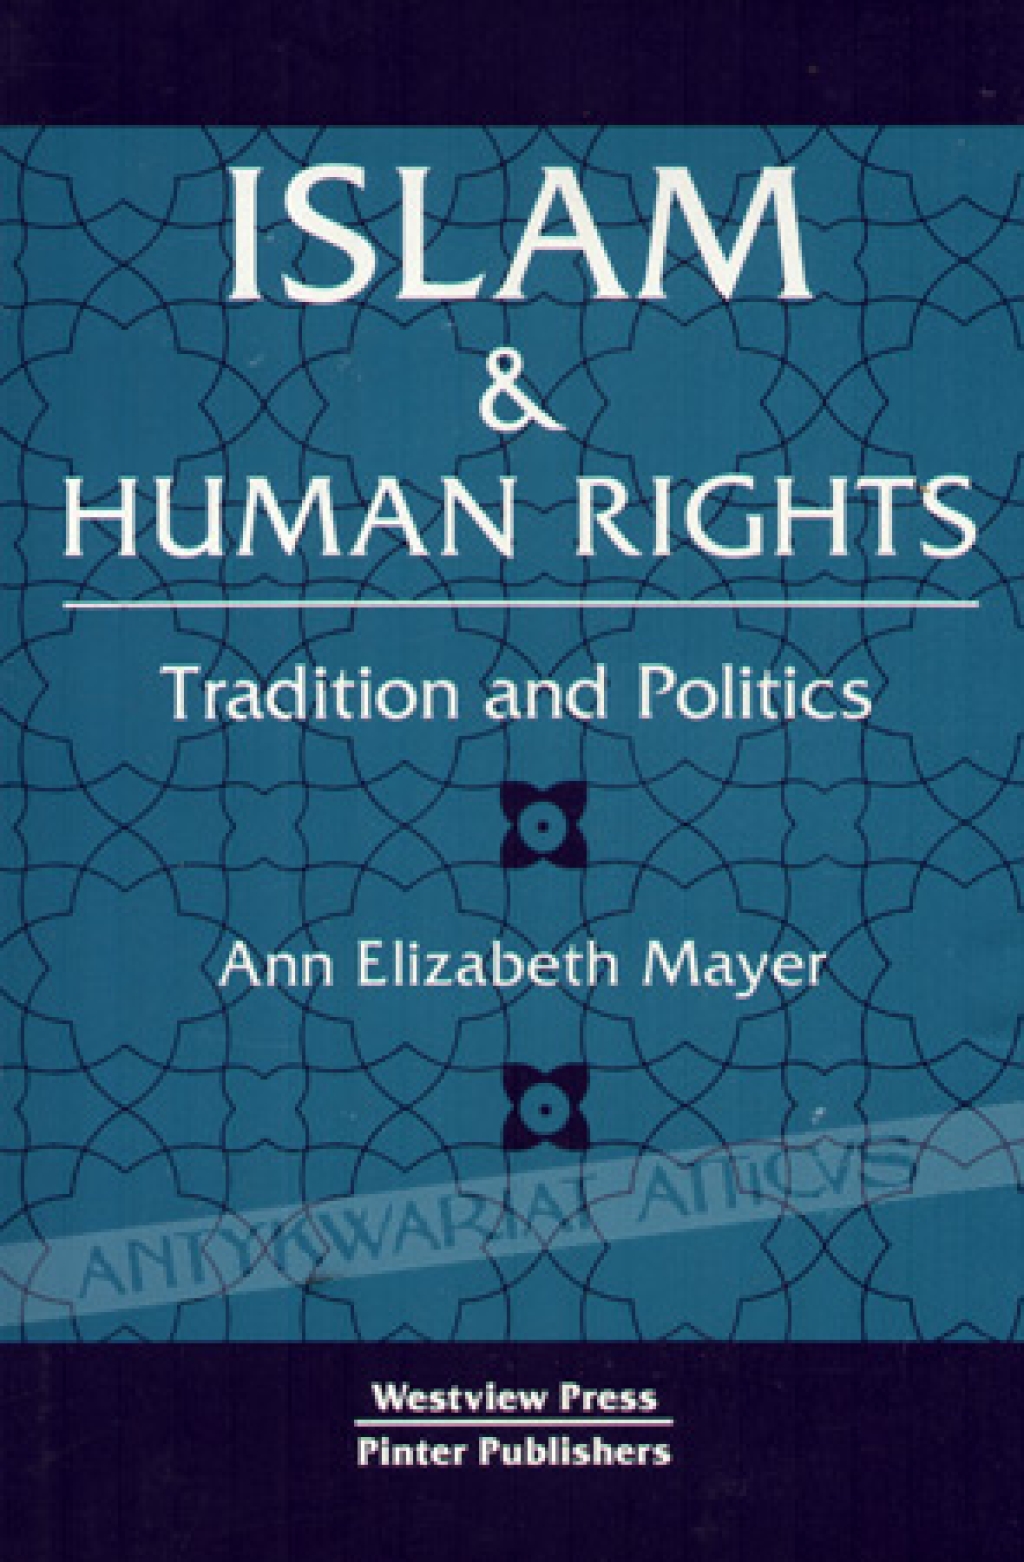 Islam & Human Rights. Tradition and Politics